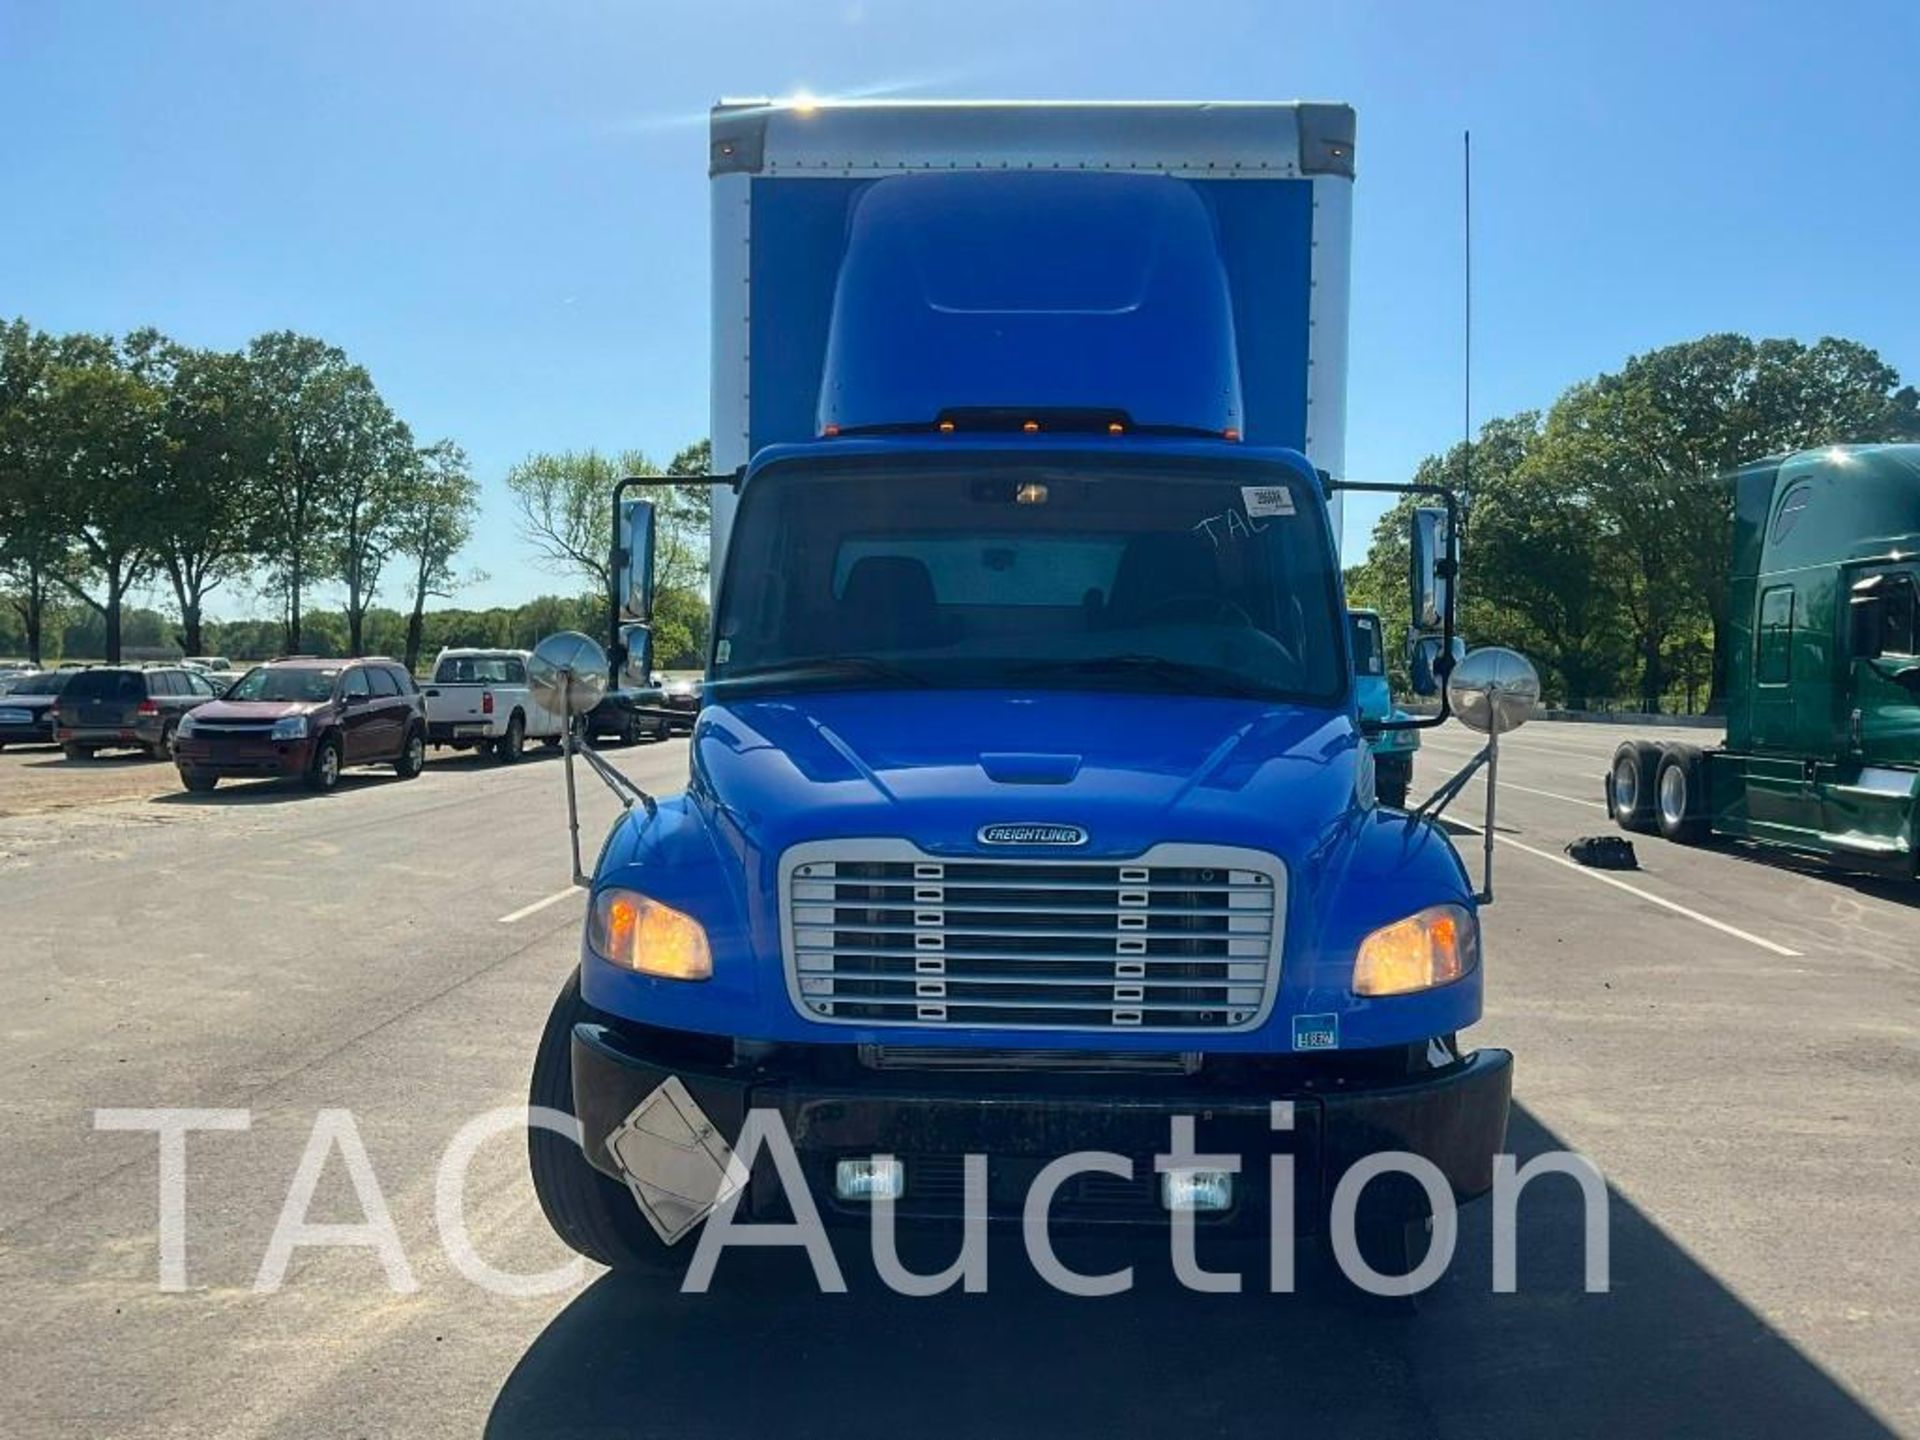 2018 Freightliner M2 Business Class 26ft Box Truck - Image 2 of 54